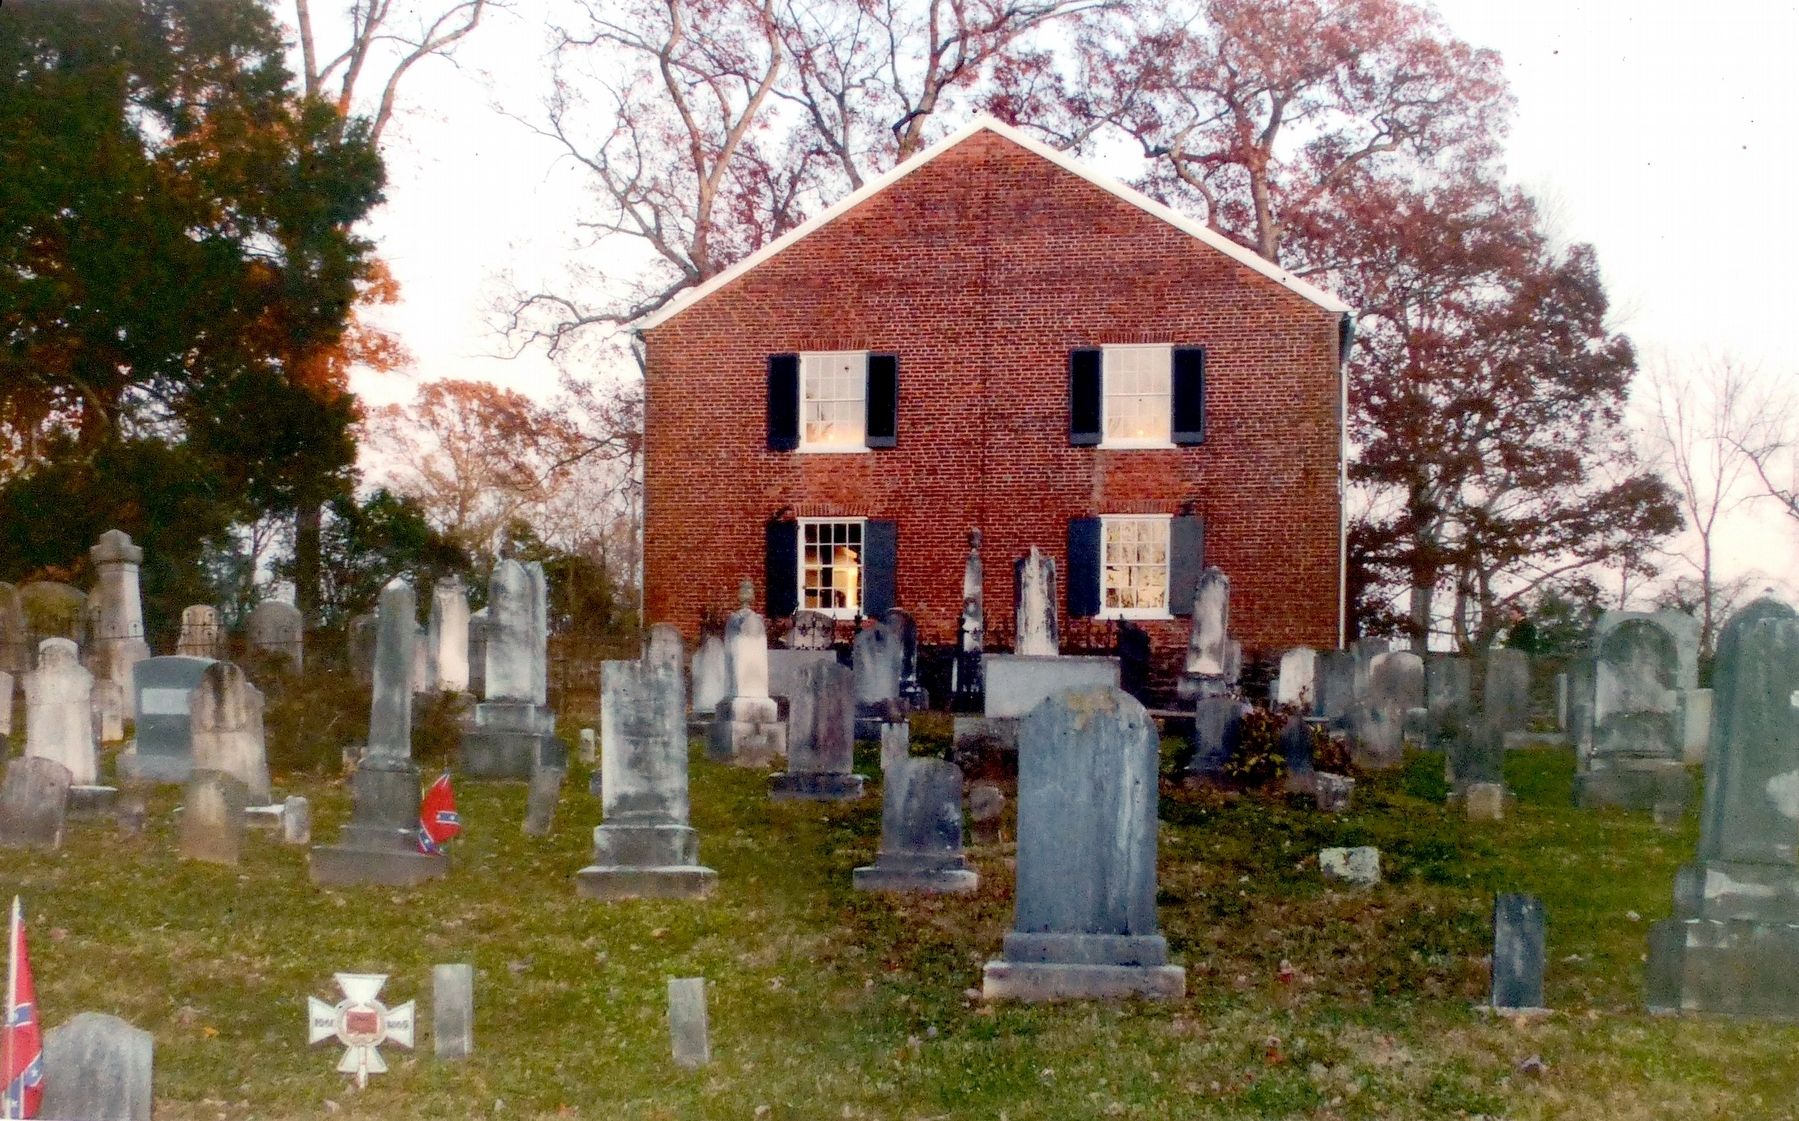 Mt. Zion Old School Baptist Church & Cemetery image. Click for full size.